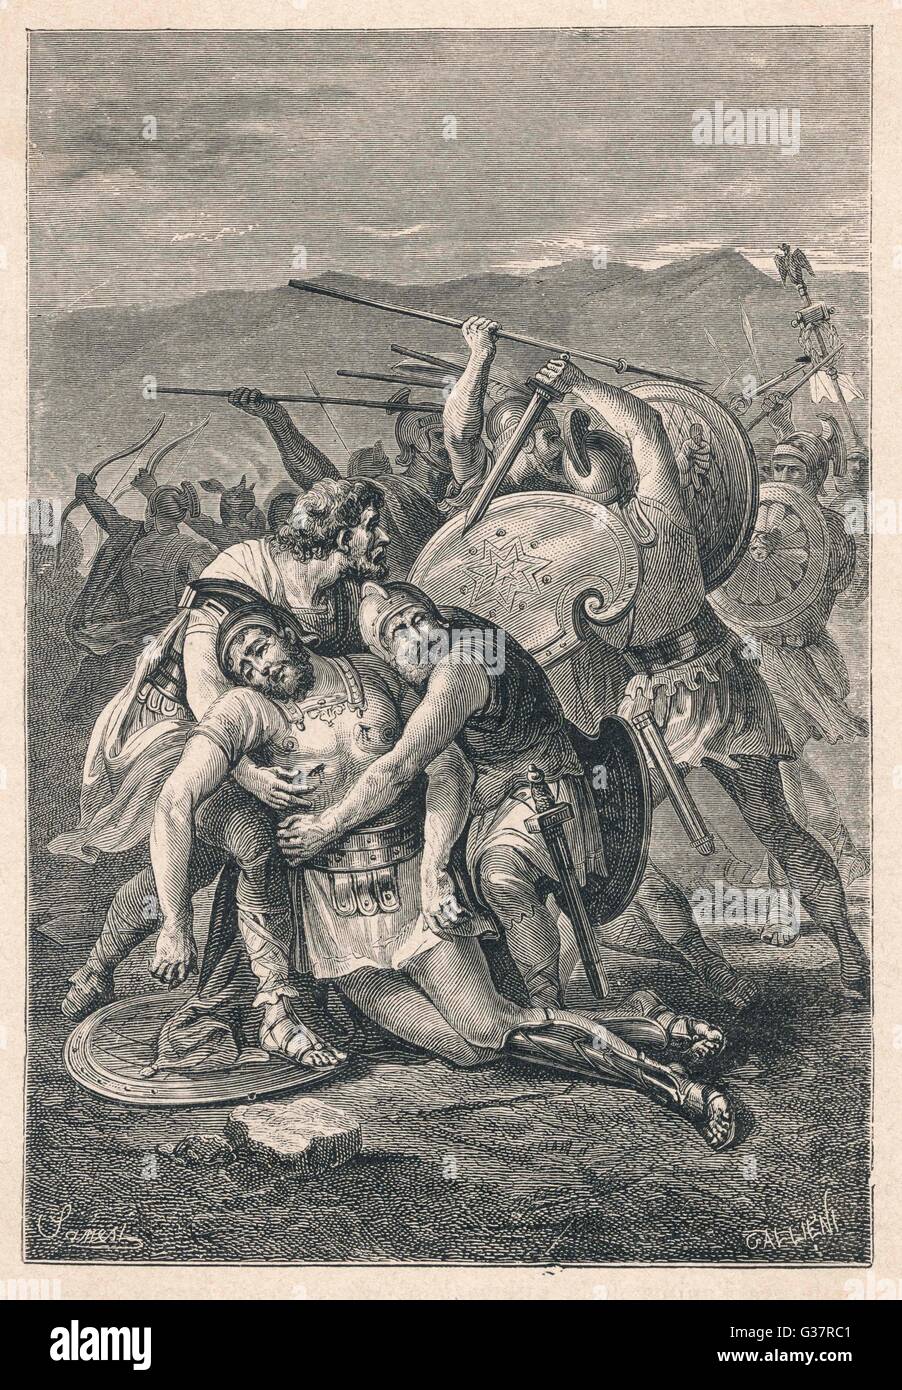 SLAVE REVOLT In the final battle Crassus  defeats the slaves and  Spartacus is killed on the  battlefield      Date: 71 BC Stock Photo